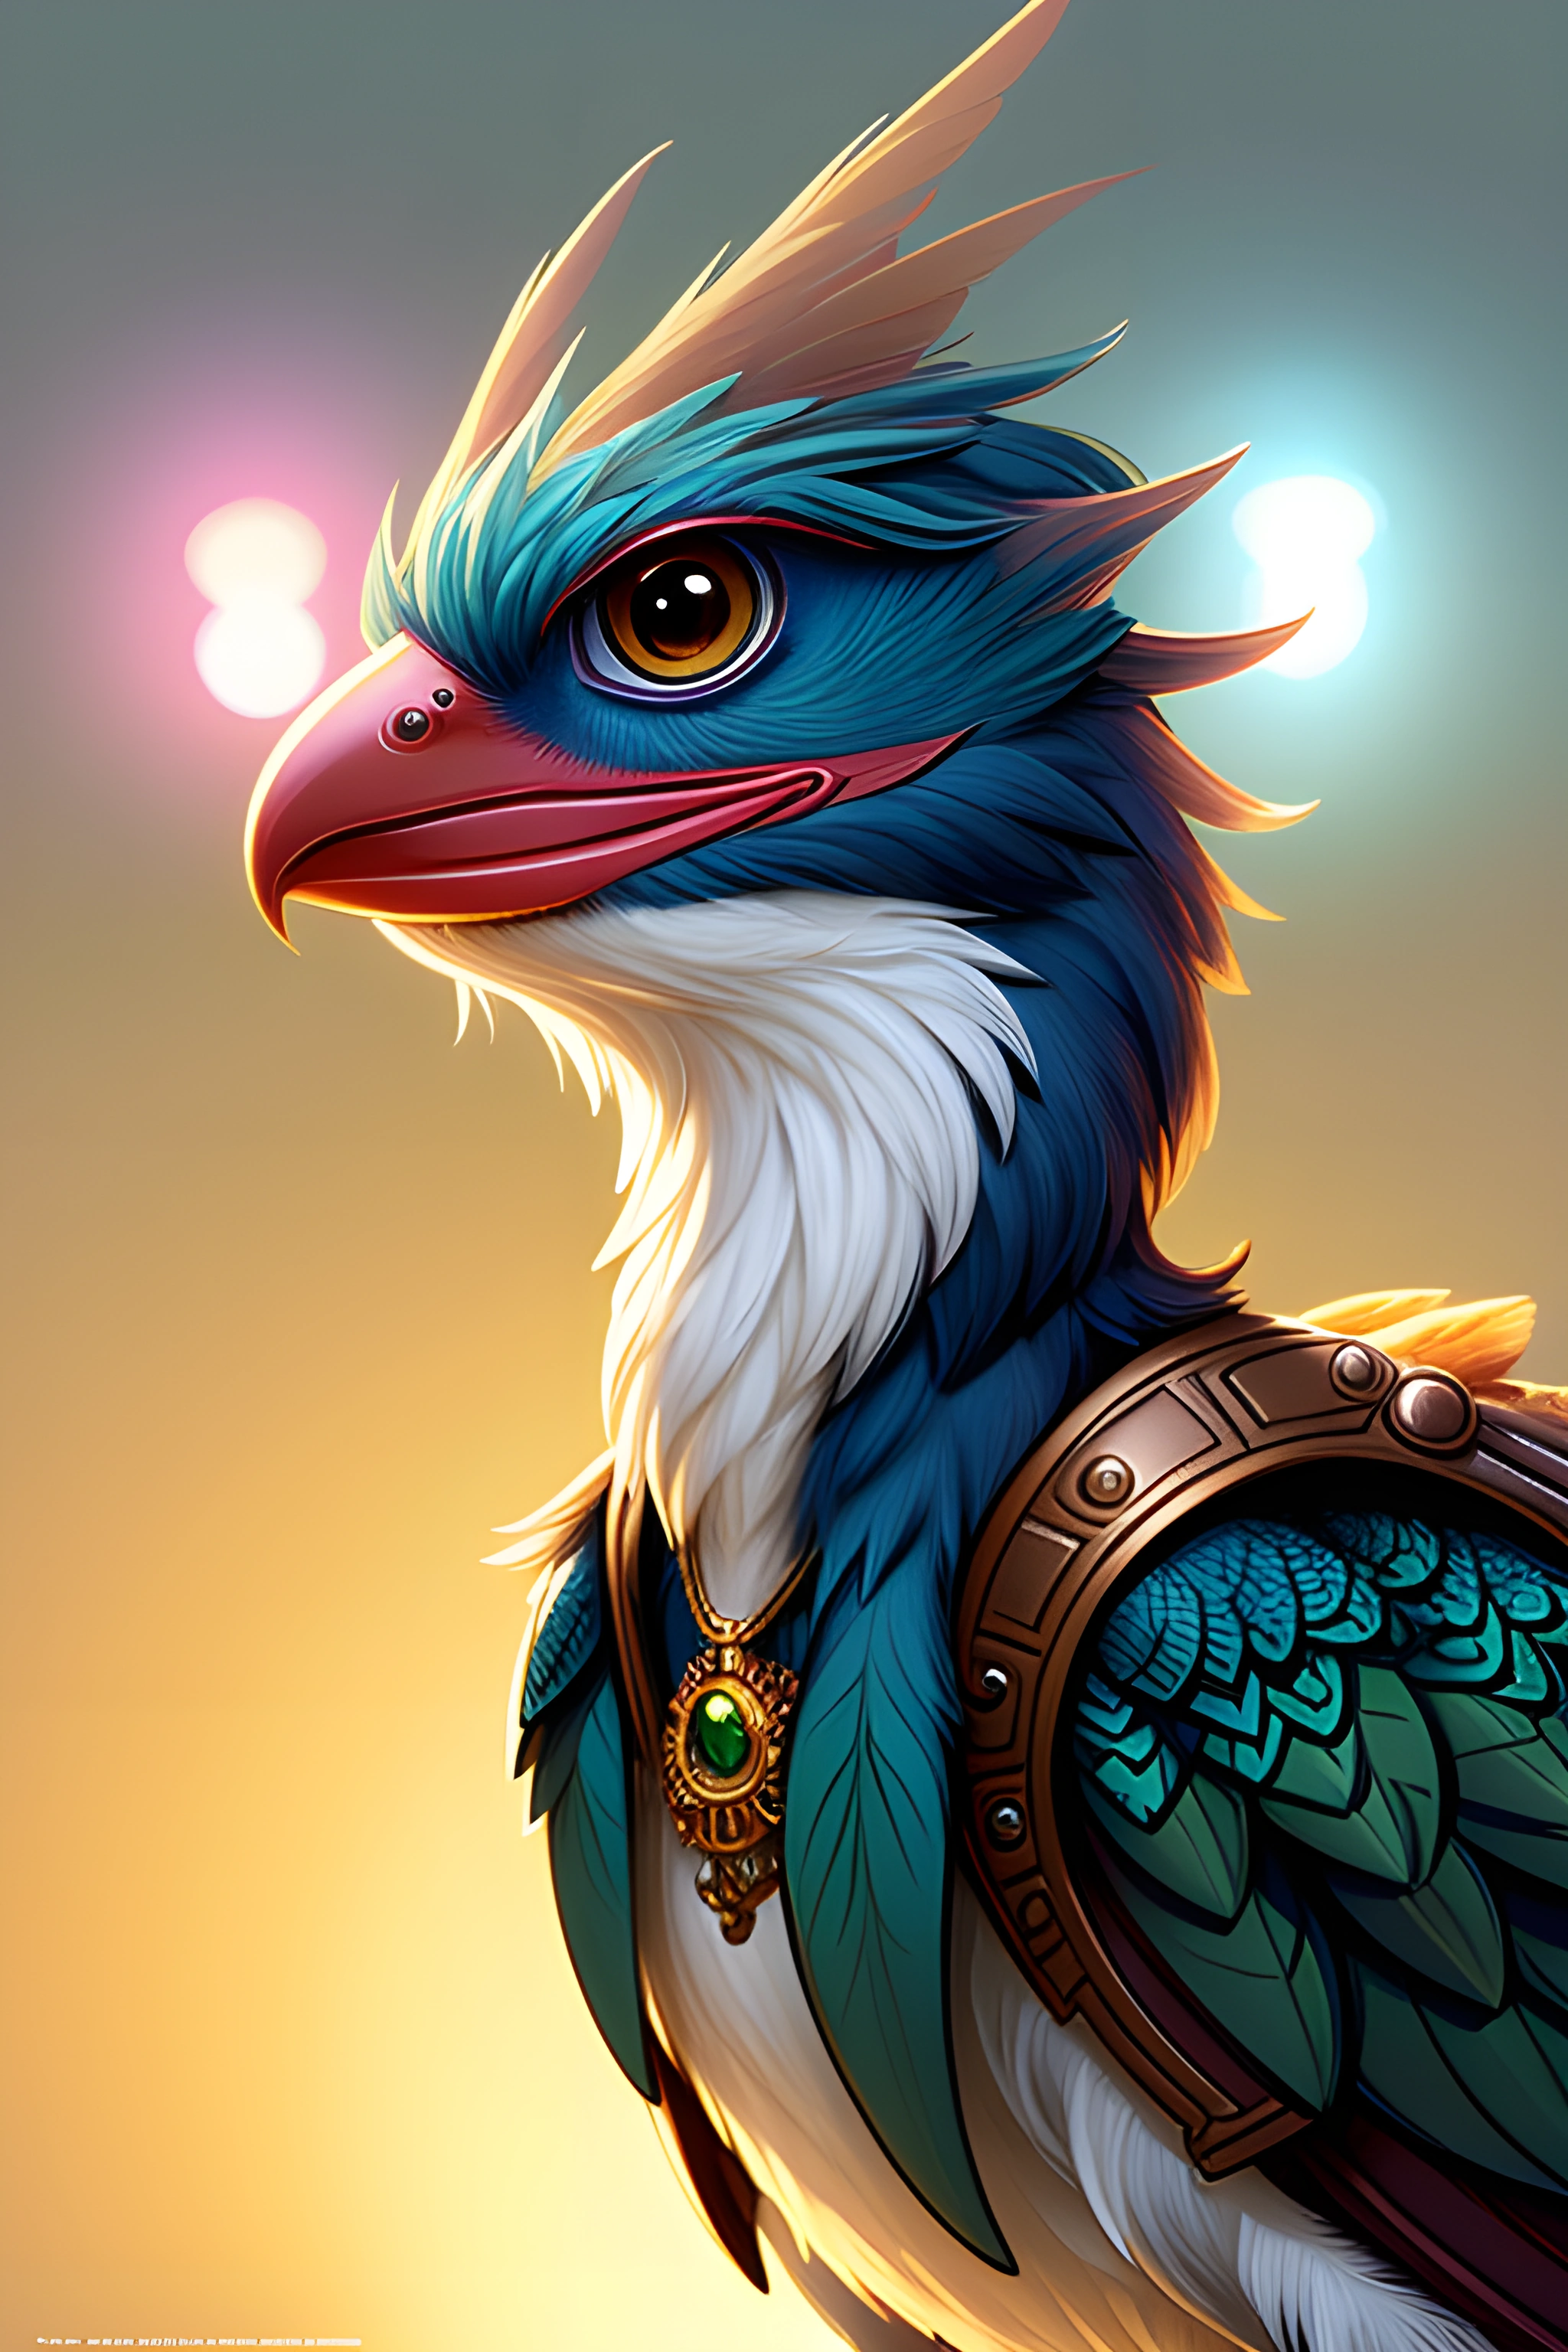 a bird with a blue and white head and a gold necklace